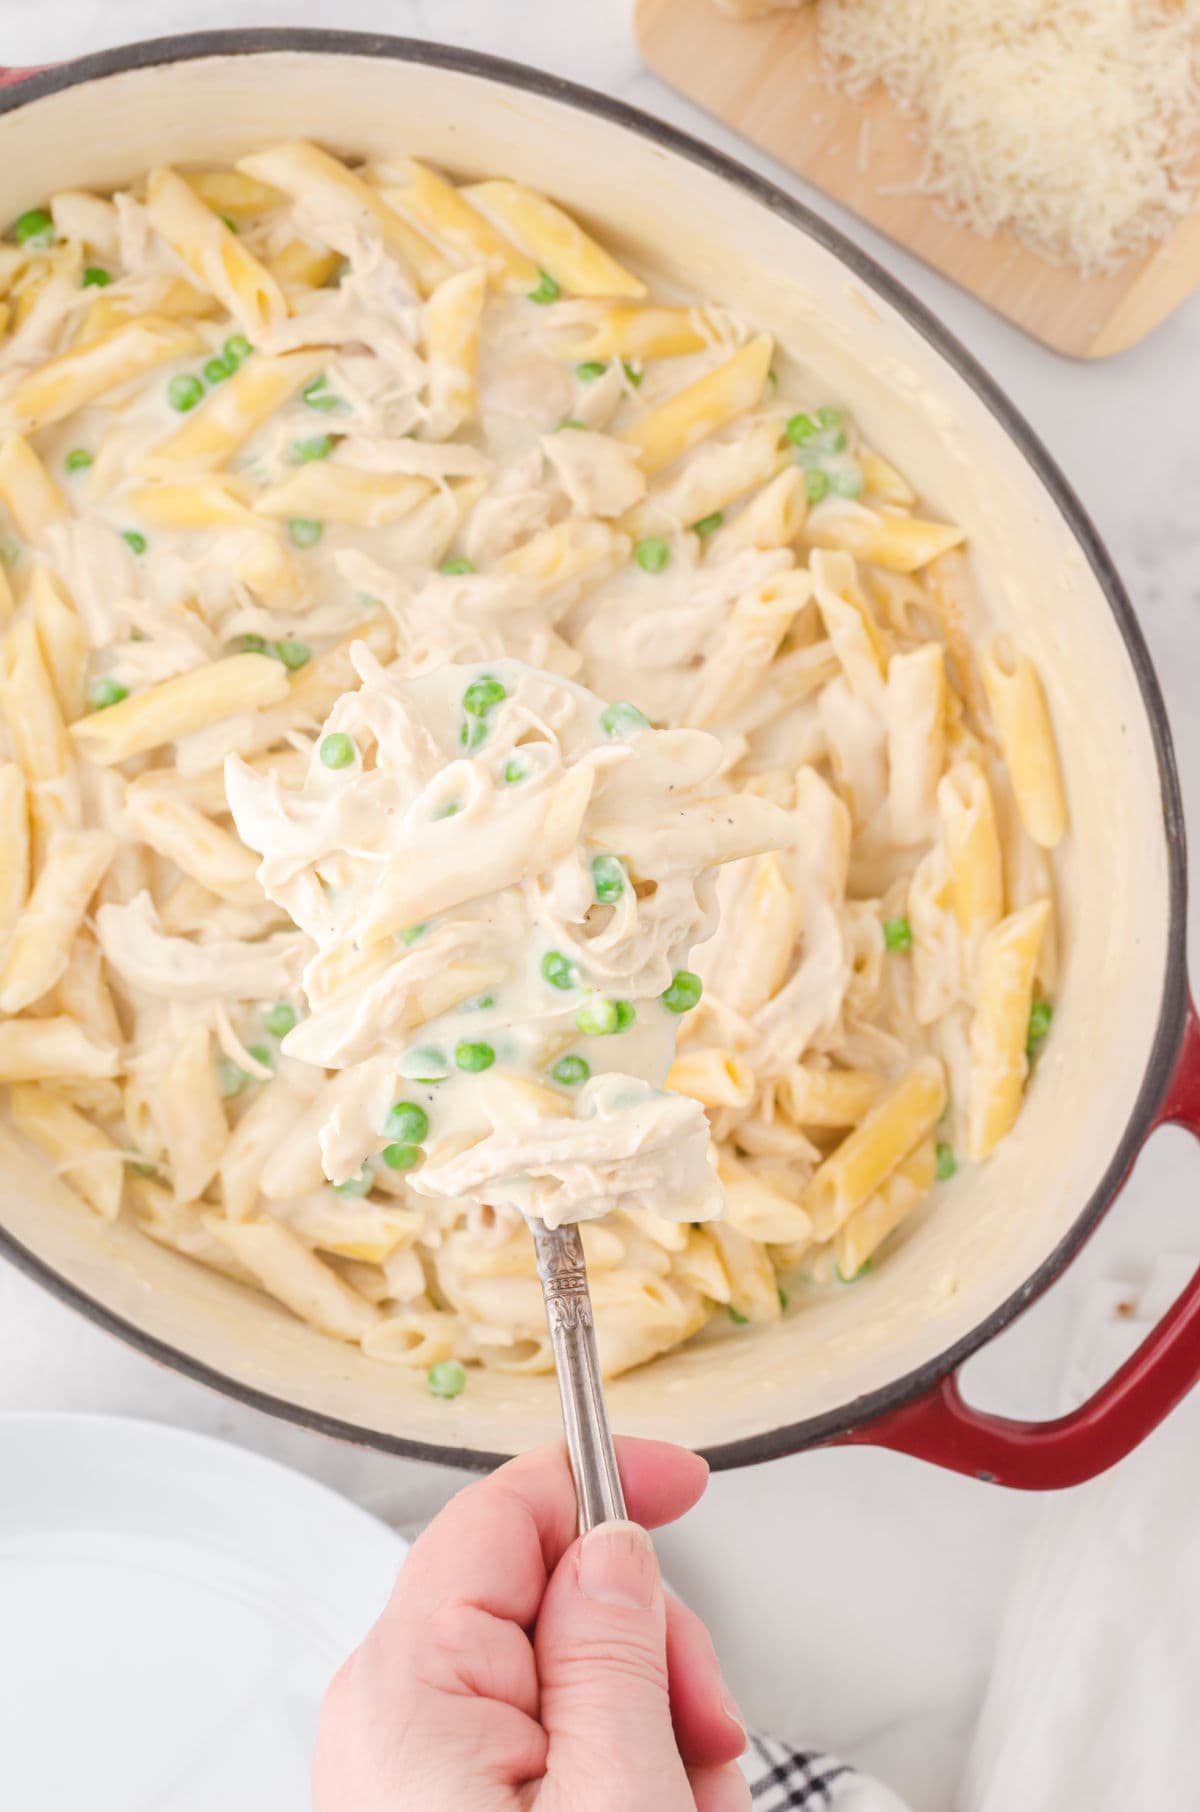 Overhead view of a pan of pasta with a creamy sauce.